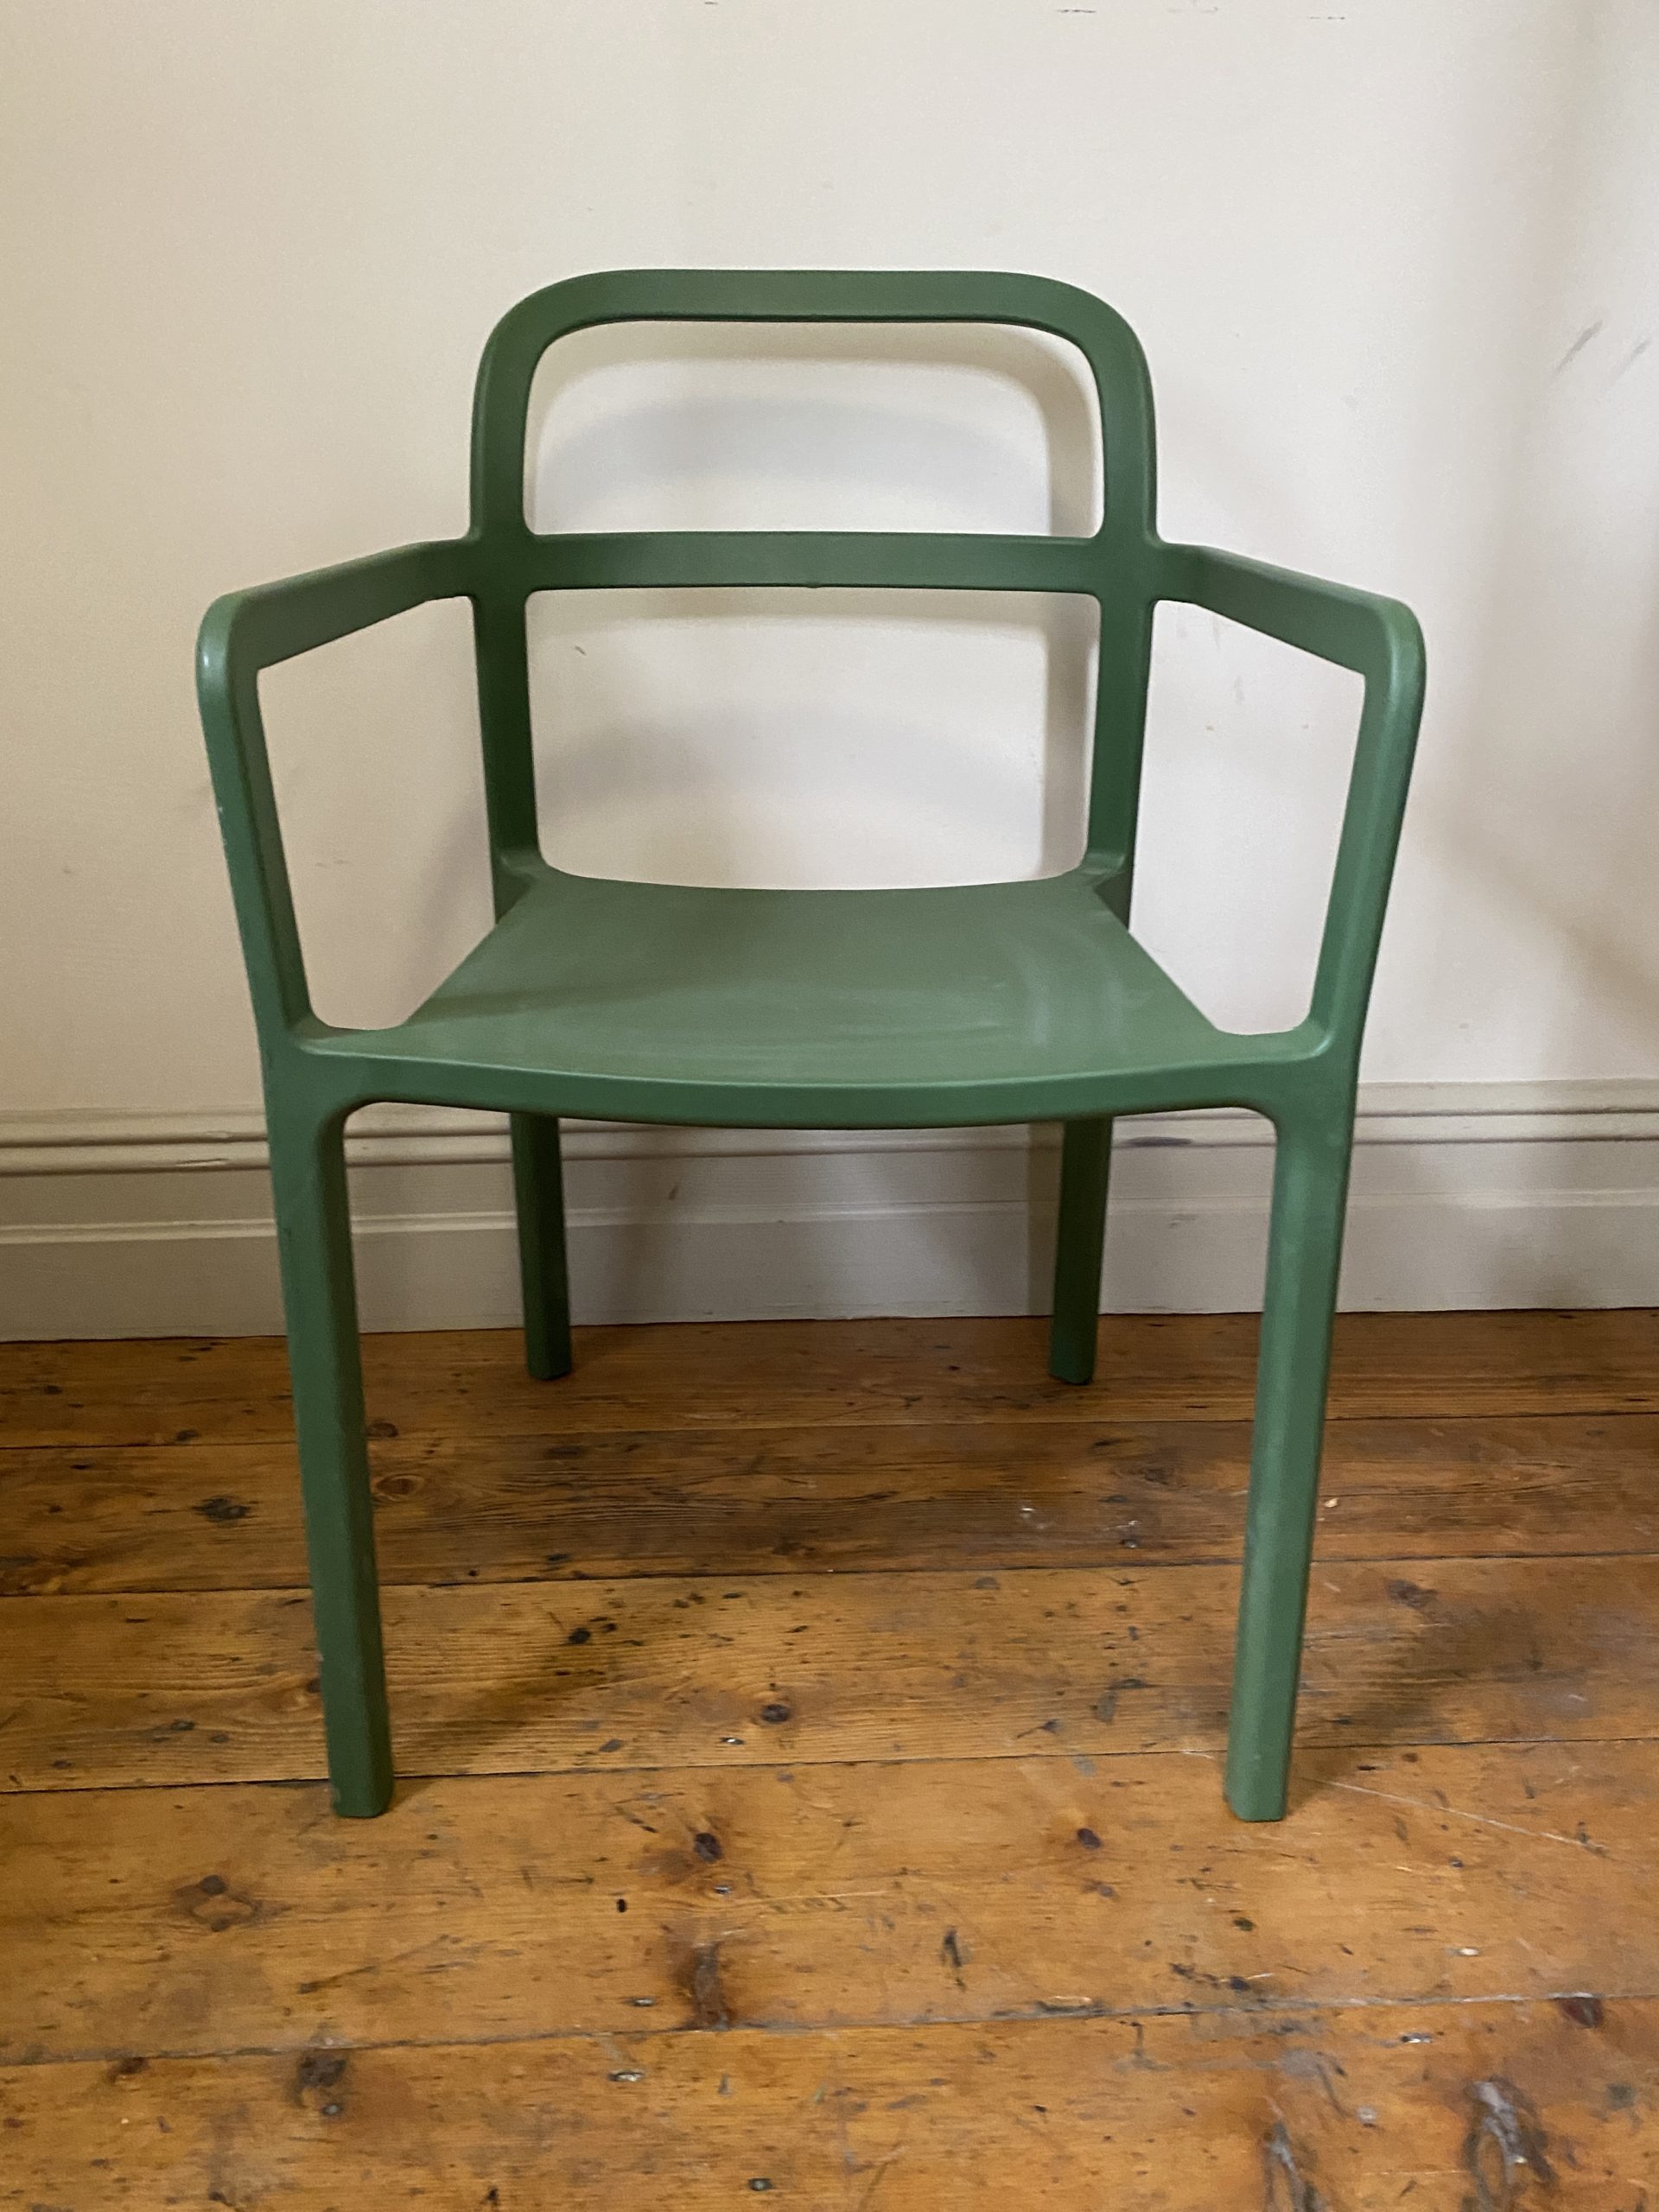 Contemporary Green Plastic Chair Insitu Manchester